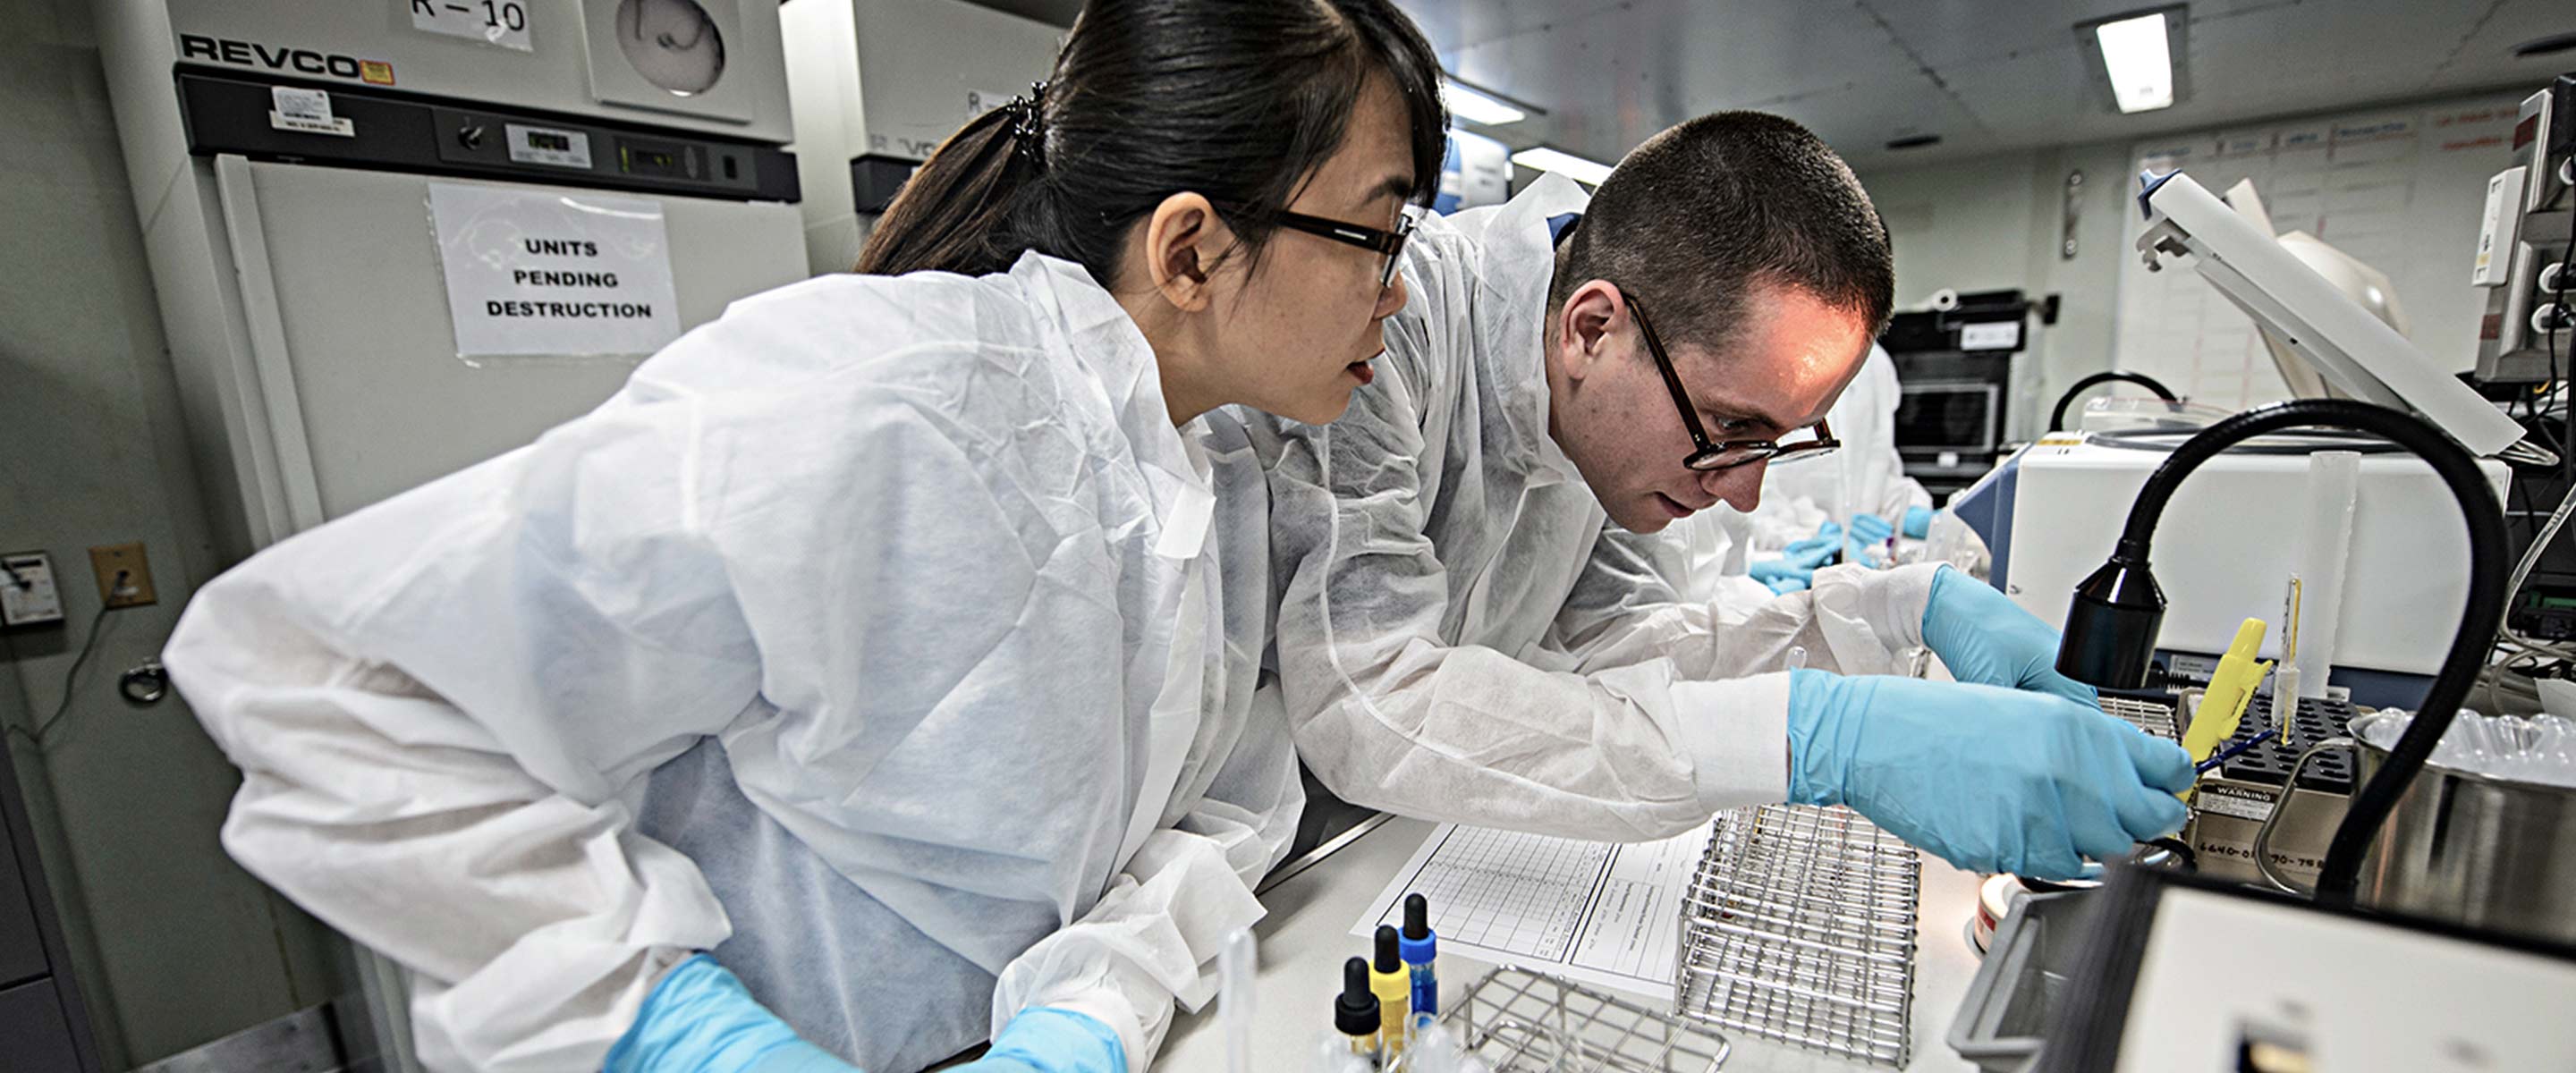 Two Navy biochemists work together in a laboratory